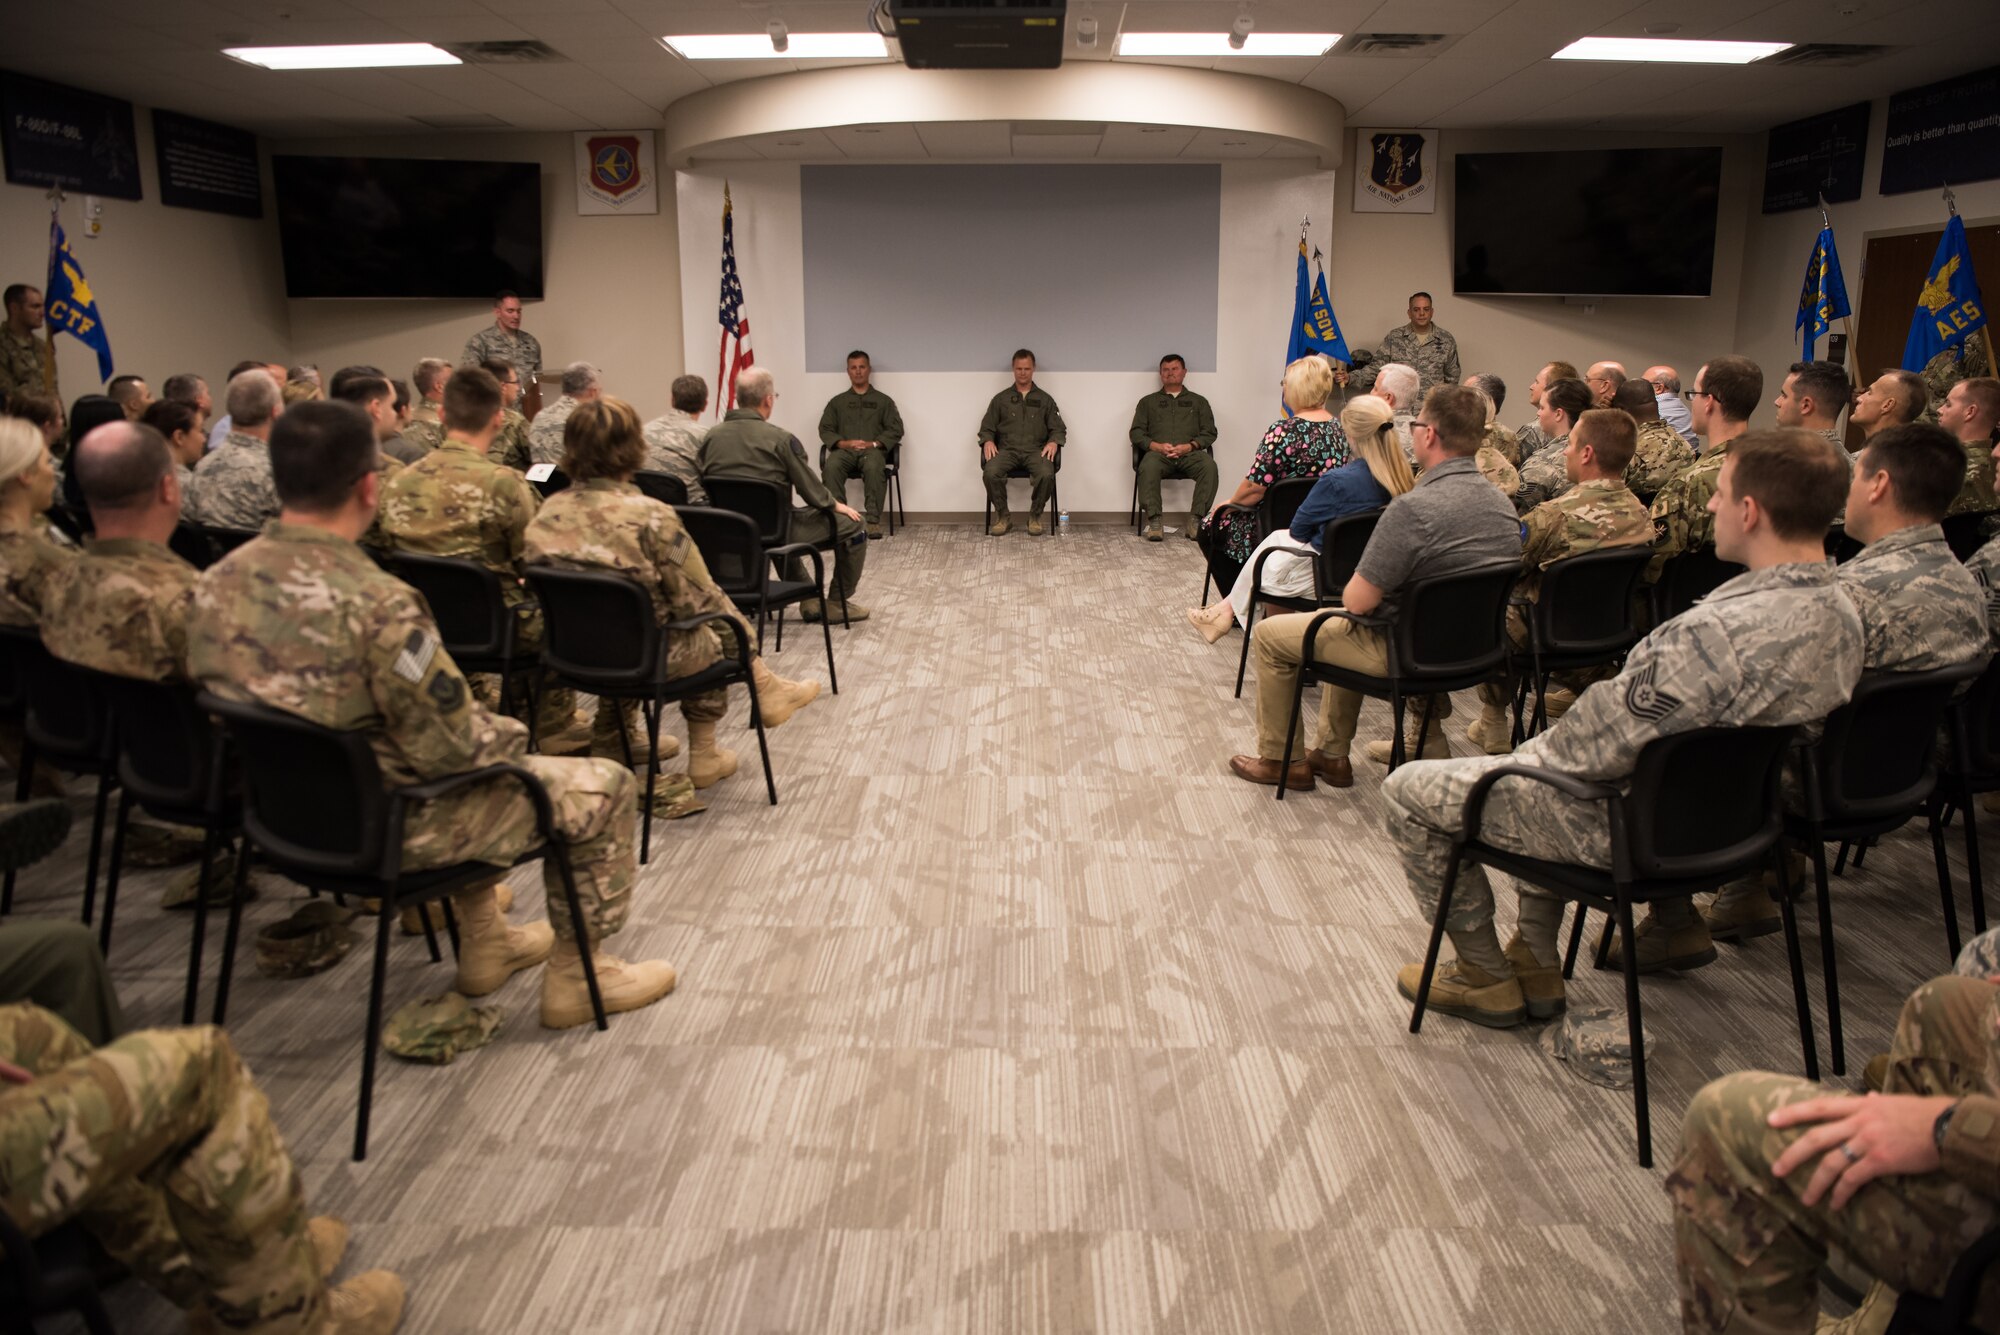 Col. Devin R. Wooden, 137th Special Operations Wing commander (left), Col. Daniel R. “Pinto” Fowler, incoming 137th Special Operations Group commander (center), and Col. Kelly W. Cobble, outgoing 137th Special Operations Group commander (right), sit at the front of the room during the Group’s change of command ceremony at Will Rogers Air National Guard Base in Oklahoma City, May 17, 2018. Fowler, formerly the Air National Guard's Advisor to U.S. Air Force Special Operations Command, Hurlbert Field, Fla., assumed command with more than 20 years of military experience, including three years as a Joint Terminal Attack Control qualified Air Liaison Officer and 12 years of flying. (U.S. Air National Guard photo by Staff Sgt. Kasey Phipps)